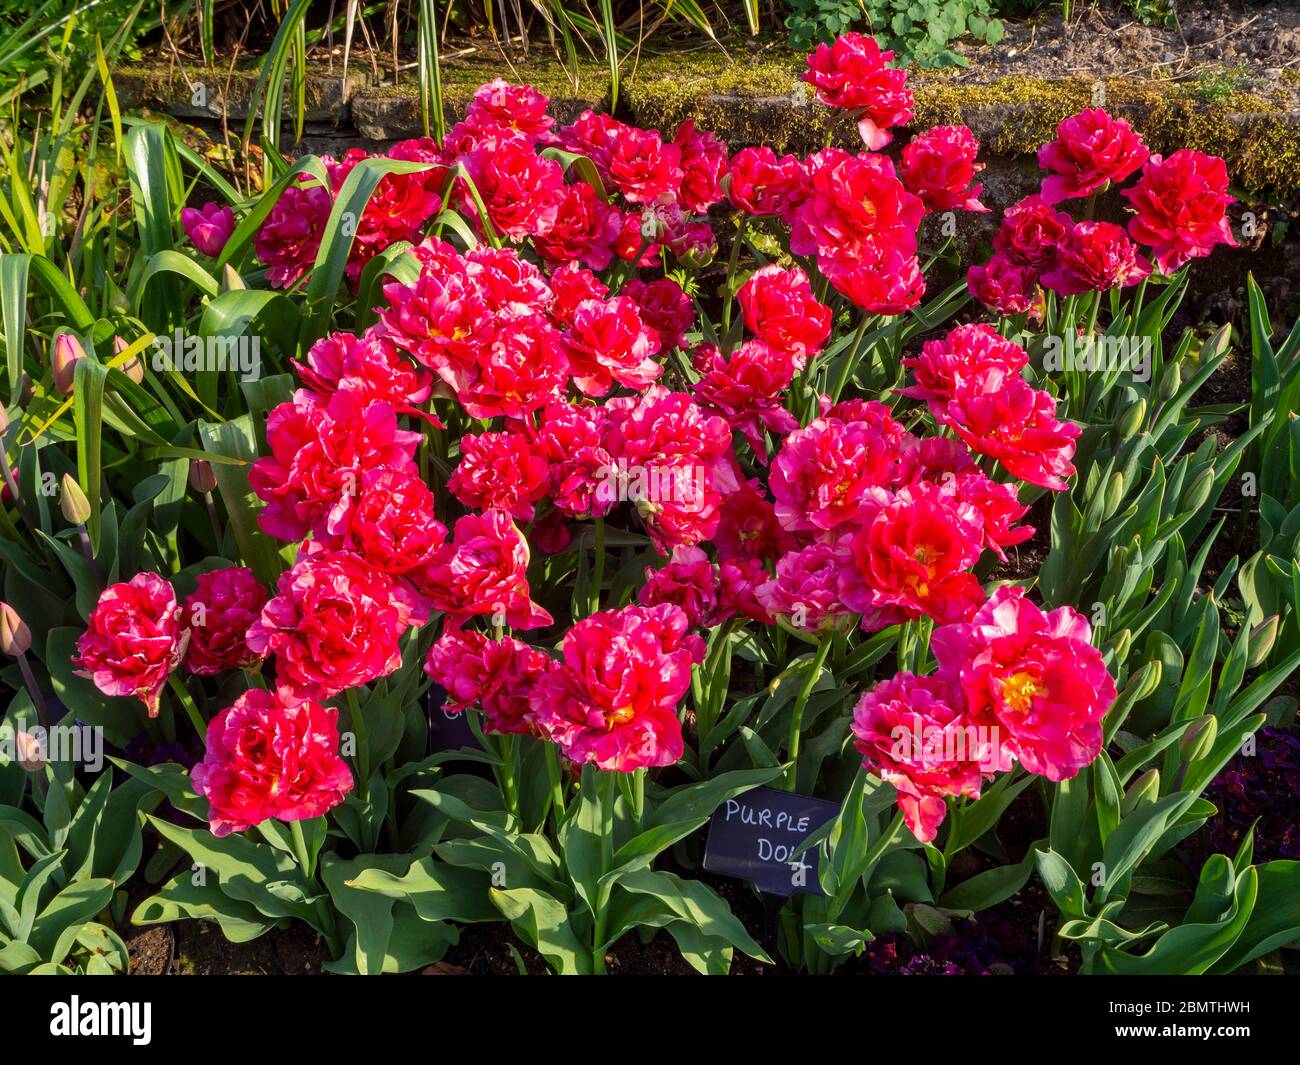 Mass planting of vibrant pink Tulip variety, Chato, at Chenies Manor sunken garden in April. Stock Photo